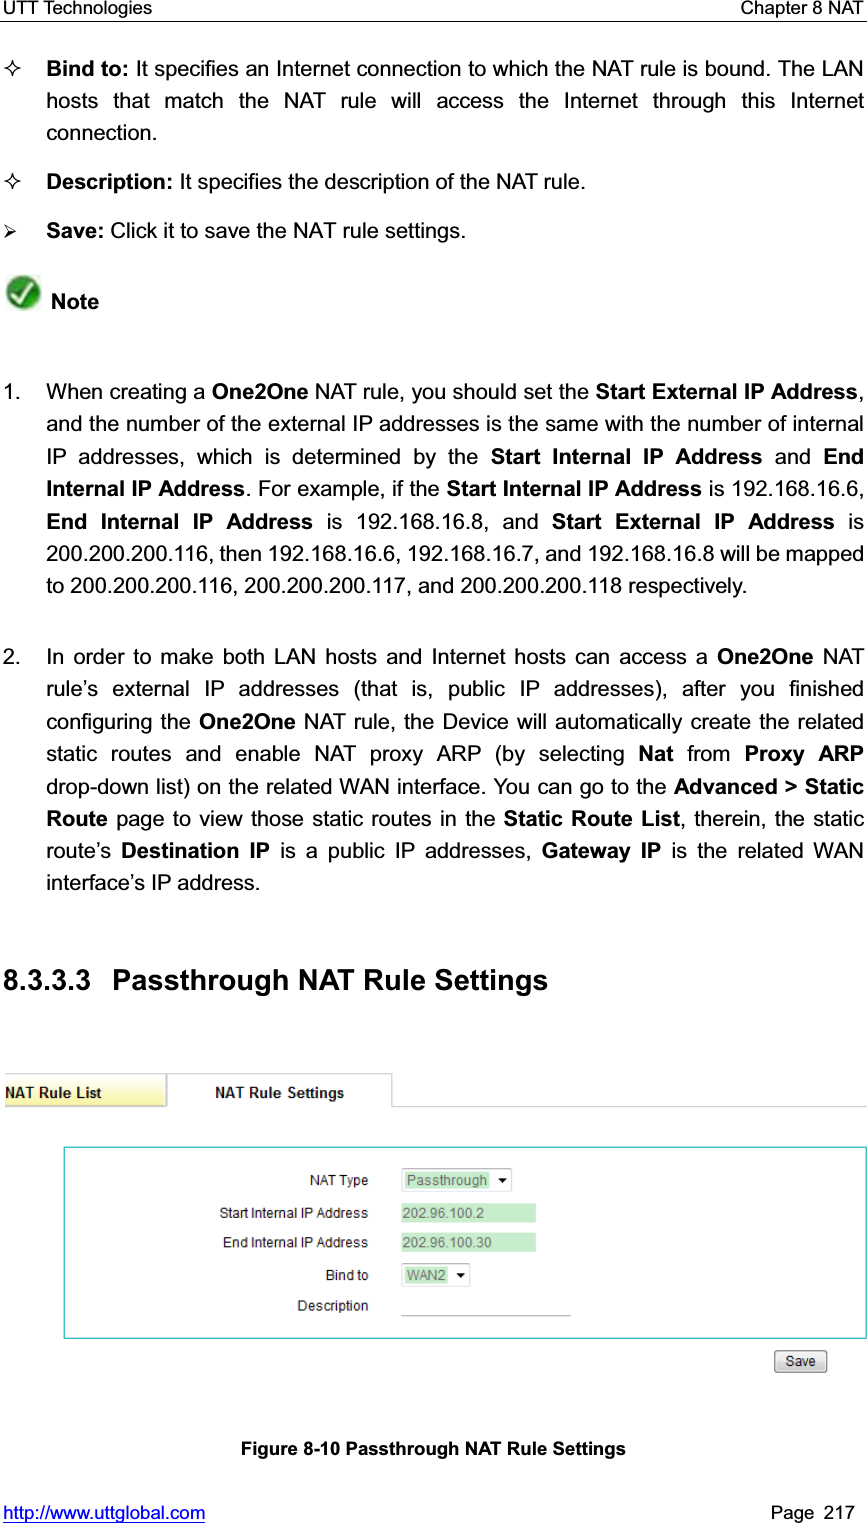 UTT Technologies    Chapter 8 NAT   http://www.uttglobal.com Page 217 Bind to: It specifies an Internet connection to which the NAT rule is bound. The LAN hosts that match the NAT rule will access the Internet through this Internet connection. Description: It specifies the description of the NAT rule. ¾Save: Click it to save the NAT rule settings.Note1. When creating a One2One NAT rule, you should set the Start External IP Address,and the number of the external IP addresses is the same with the number of internal IP addresses, which is determined by the Start Internal IP Address and EndInternal IP Address. For example, if the Start Internal IP Address is 192.168.16.6, End Internal IP Address is 192.168.16.8, and Start External IP Address is 200.200.200.116, then 192.168.16.6, 192.168.16.7, and 192.168.16.8 will be mapped to 200.200.200.116, 200.200.200.117, and 200.200.200.118 respectively. 2.  In order to make both LAN hosts and Internet hosts can access a One2One NAT rule¶s external IP addresses (that is, public IP addresses), after you finished configuring the One2One NAT rule, the Device will automatically create the related static routes and enable NAT proxy ARP (by selecting Nat from Proxy ARP drop-down list) on the related WAN interface. You can go to the Advanced &gt; Static Route page to view those static routes in the Static Route List, therein, the static route¶sDestination IP is a public IP addresses, Gateway IP is the related WAN interface¶s IP address. 8.3.3.3 Passthrough NAT Rule Settings Figure 8-10 Passthrough NAT Rule Settings 